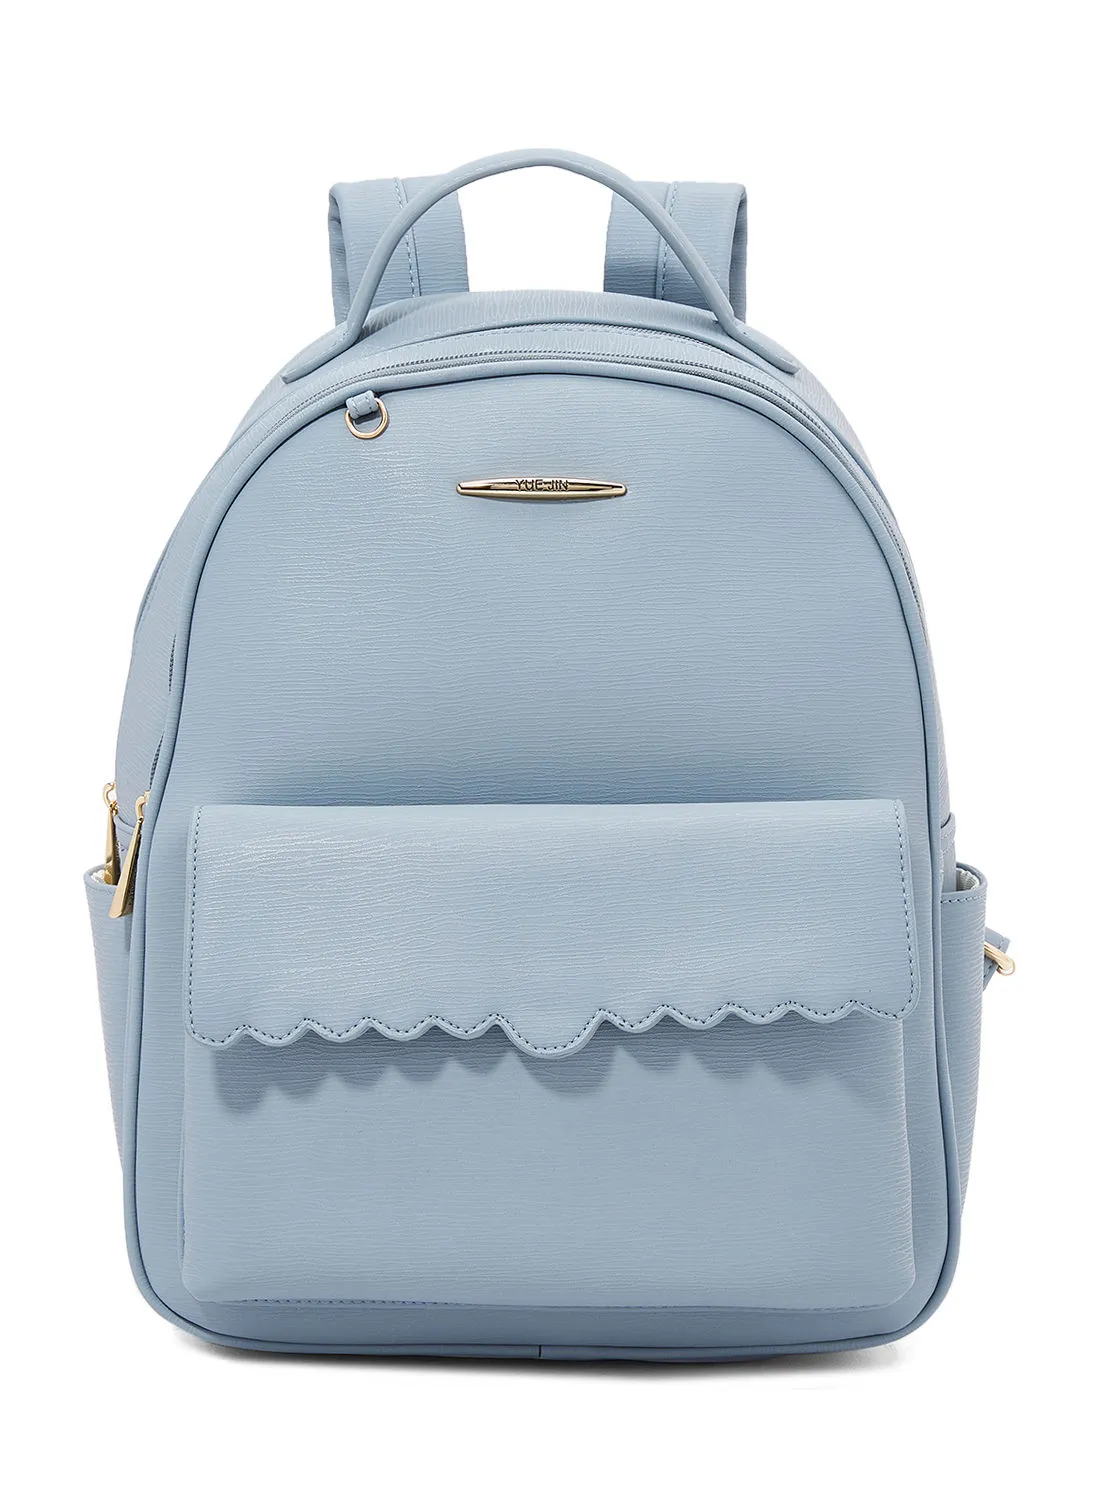 YUEJIN Faux Leather Backpack Blue